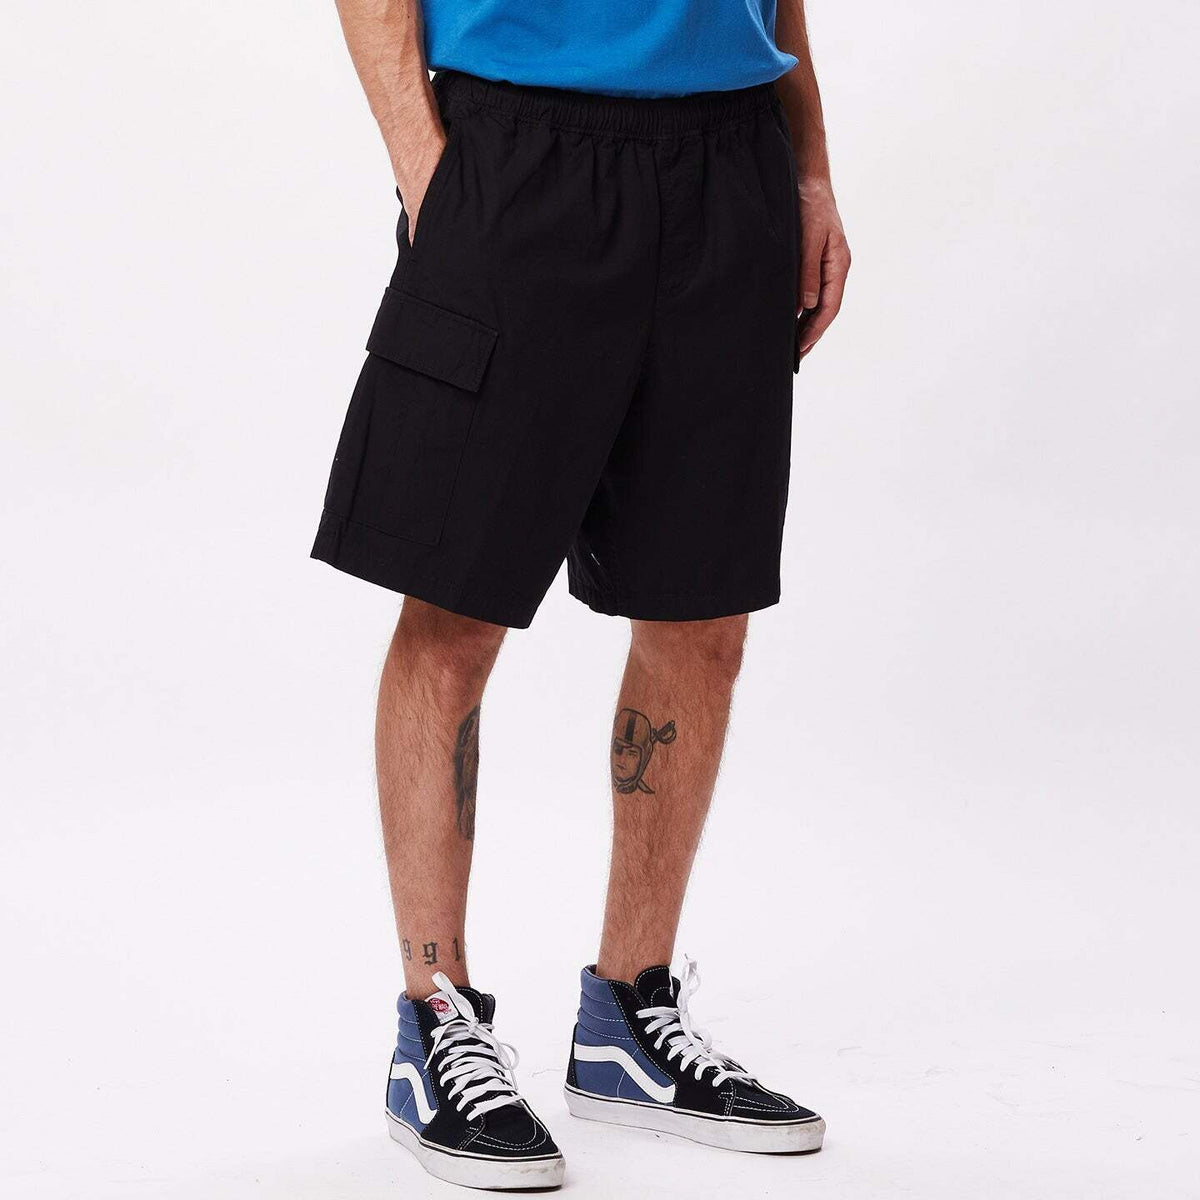 Obey ripstop cargo short